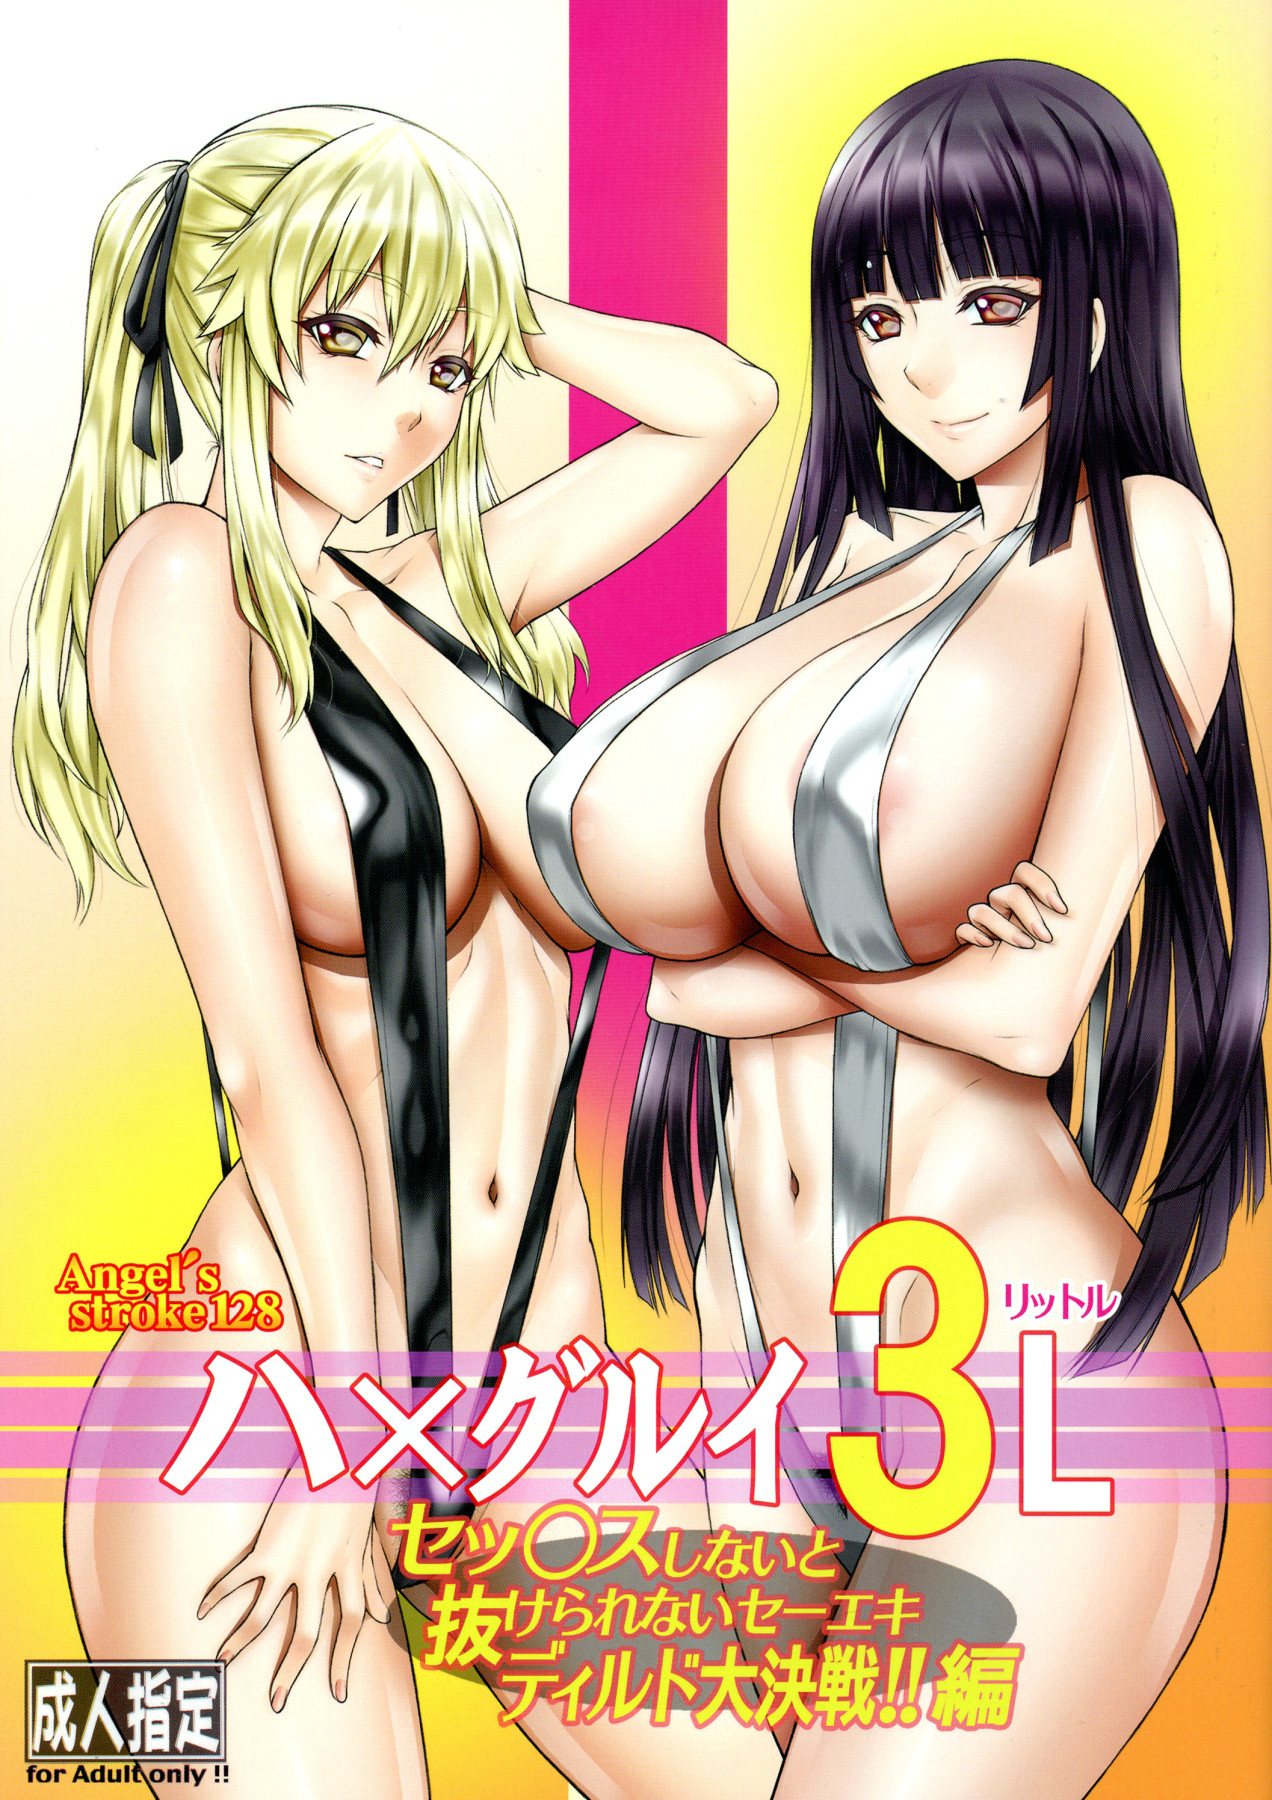 Hentai Manga Comic-Fucking Madness 3L - A Decisive Battle Where If You Don't Have Sex Then You Must Compete With a Sperm Shooting Dildo That Won't Come out!!-Read-1